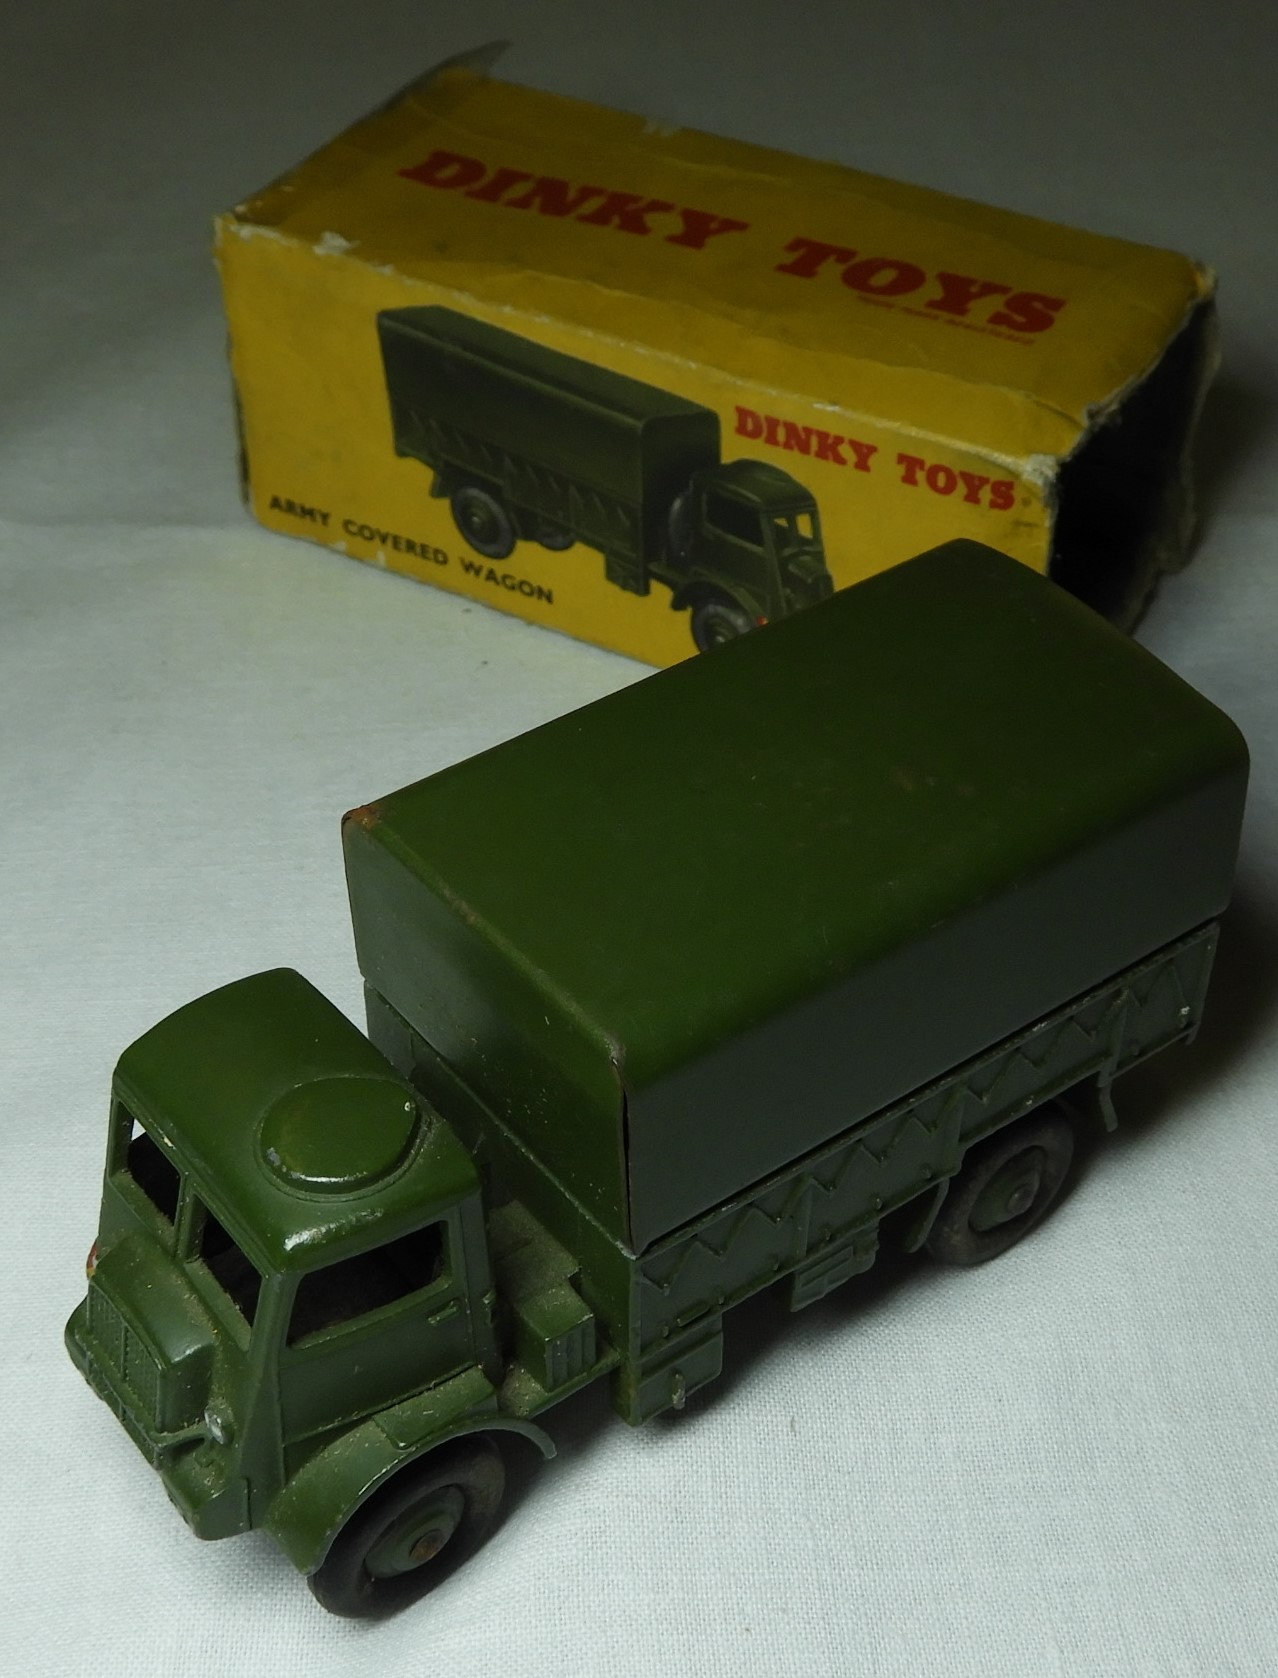 DINKY TOYS 623 ARMY COVERED WAGON YELLOW BOX